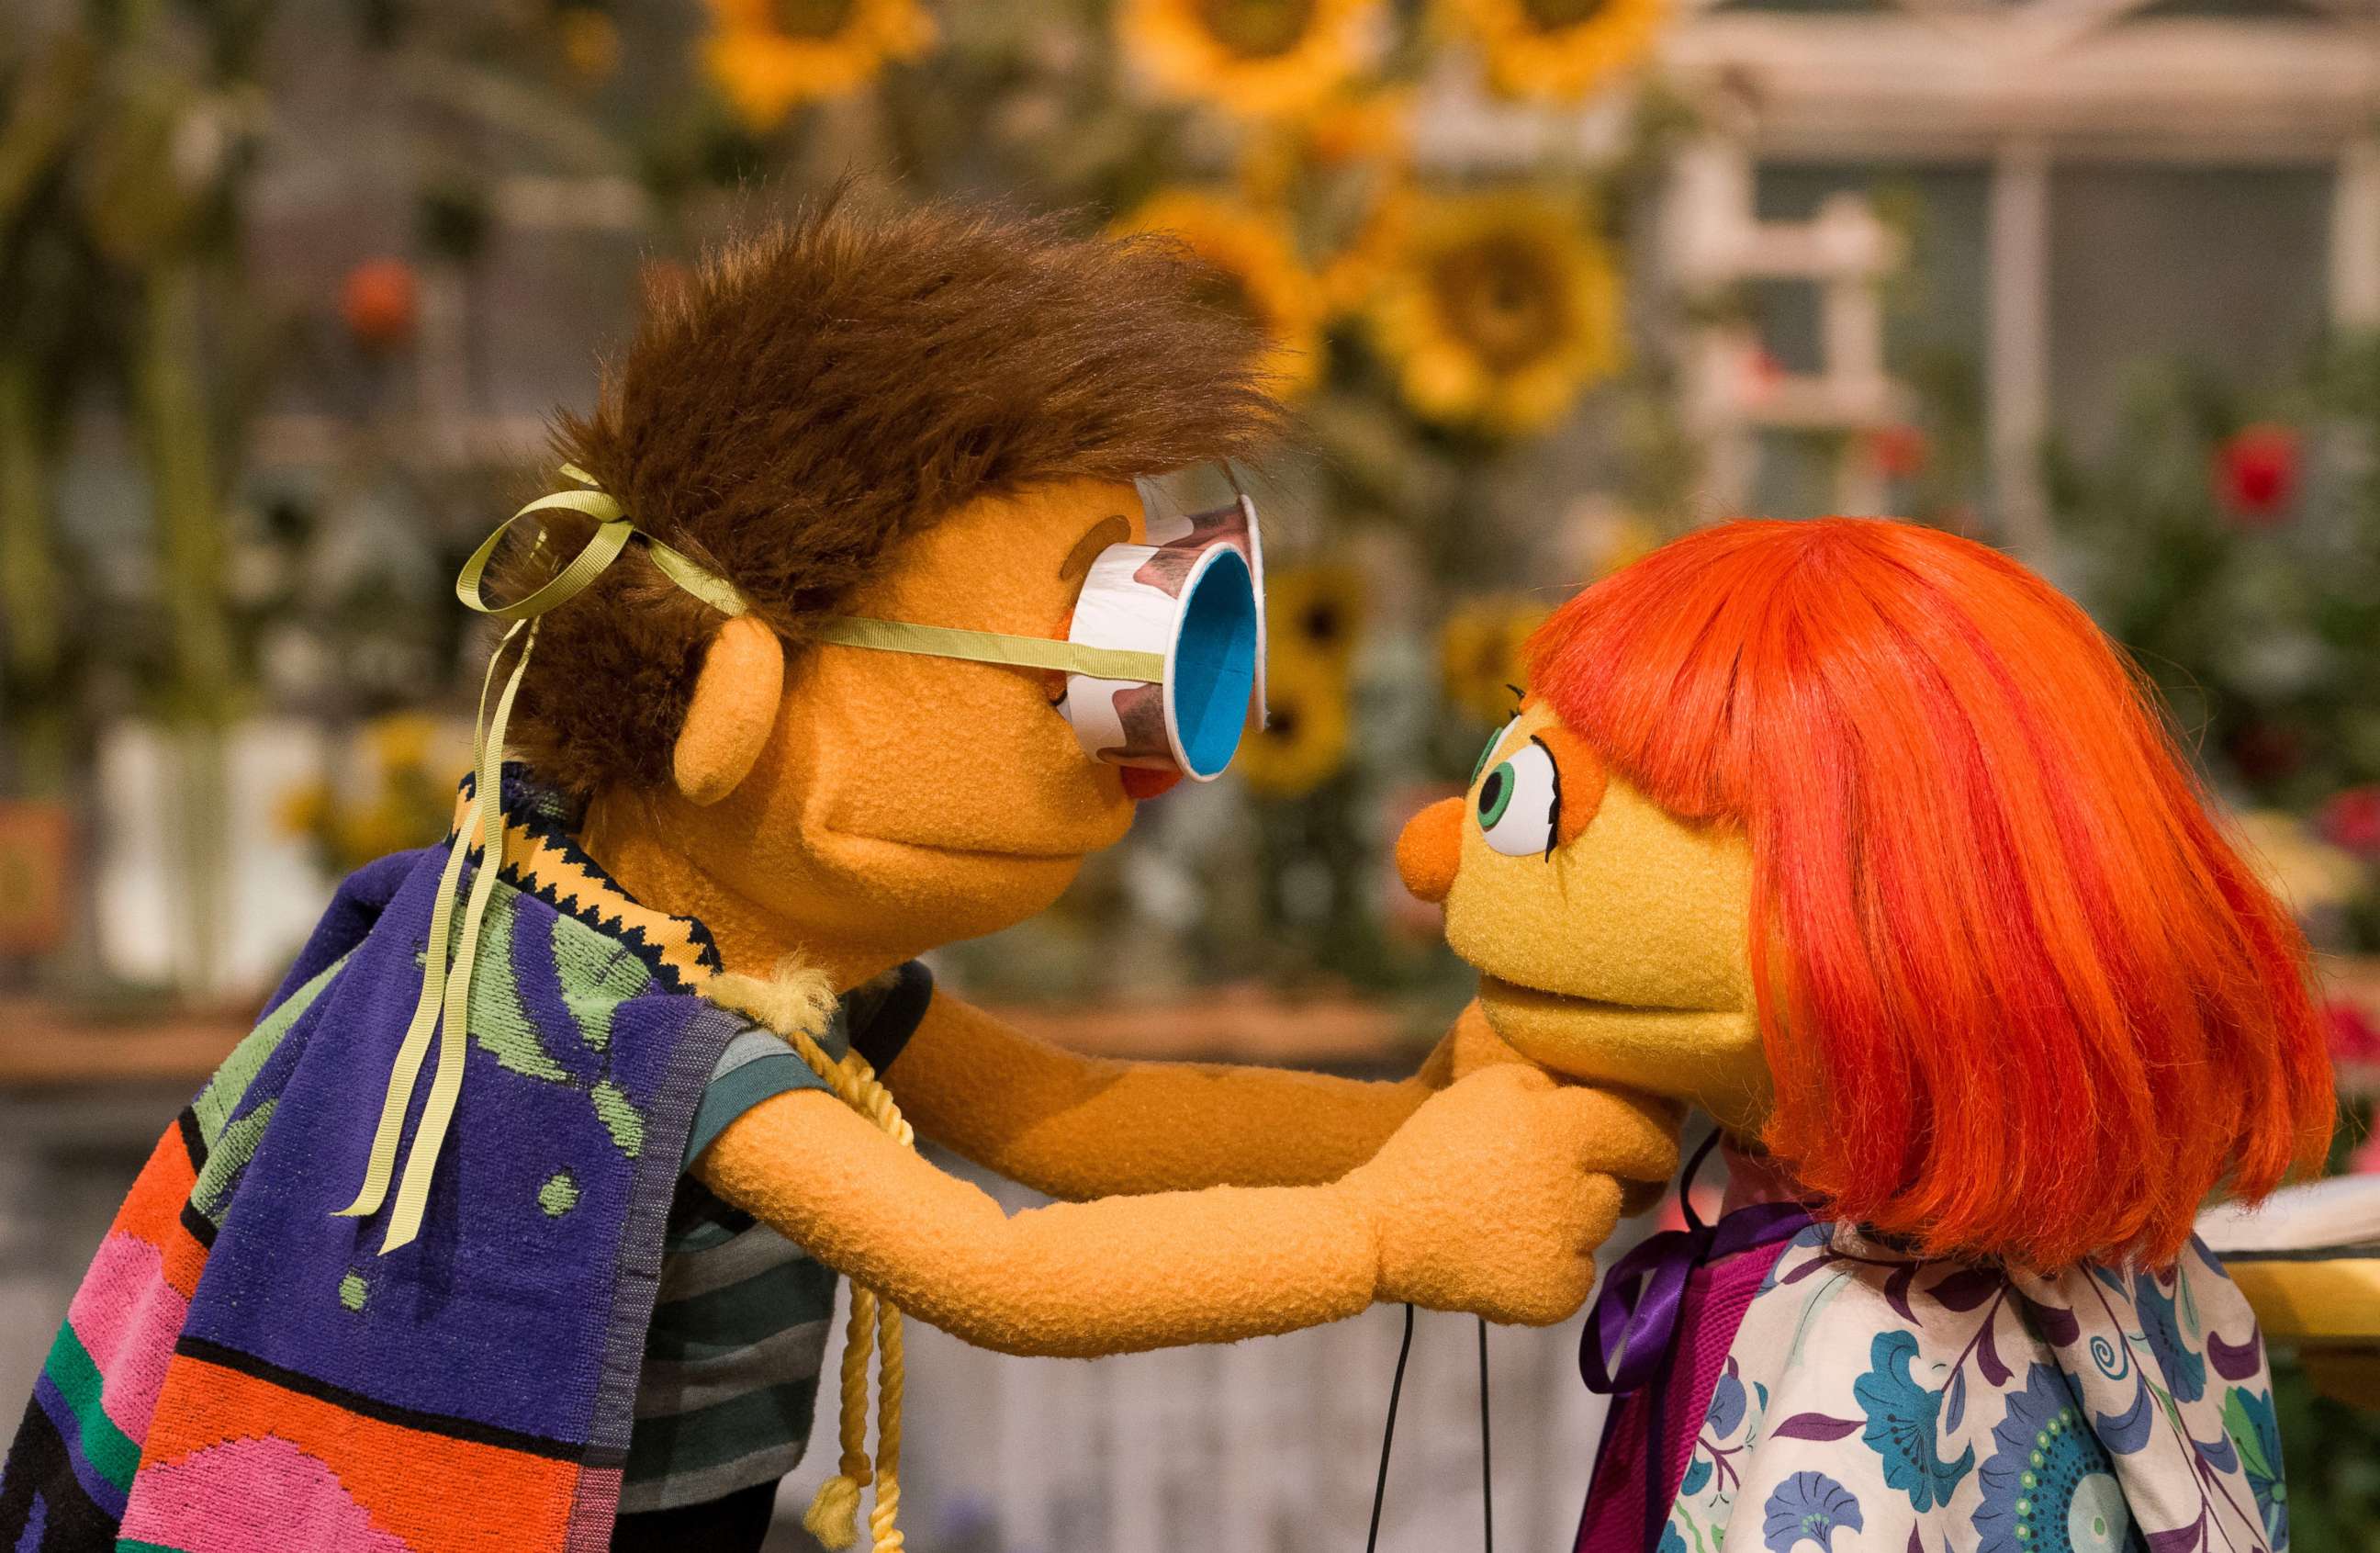 PHOTO: In honor of Autism Acceptance Day, "Sesame Street" is highlighting how all children are amazing with new resources for families, and brand new content featuring Julia and the special relationship she shares with her brother Samuel.